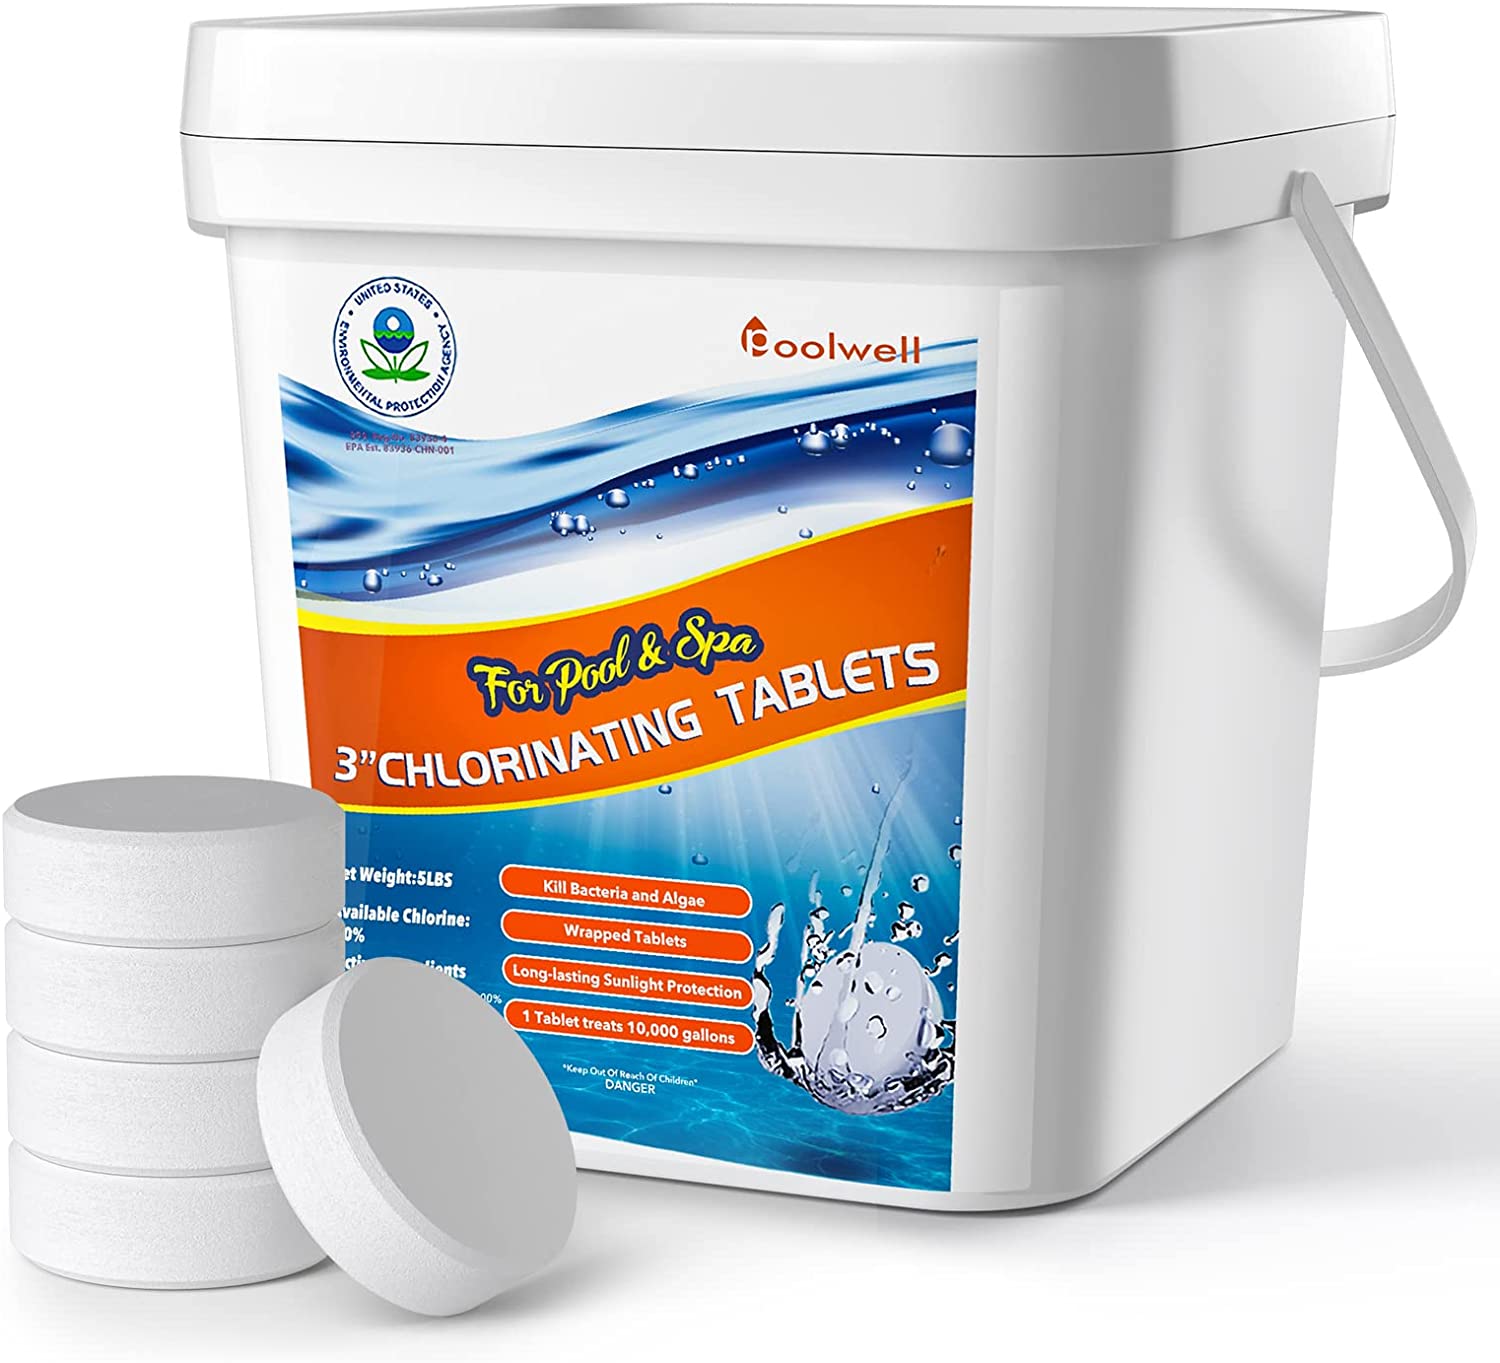 Review of - POOLWELL Pool & SPA Chlorine Tablets